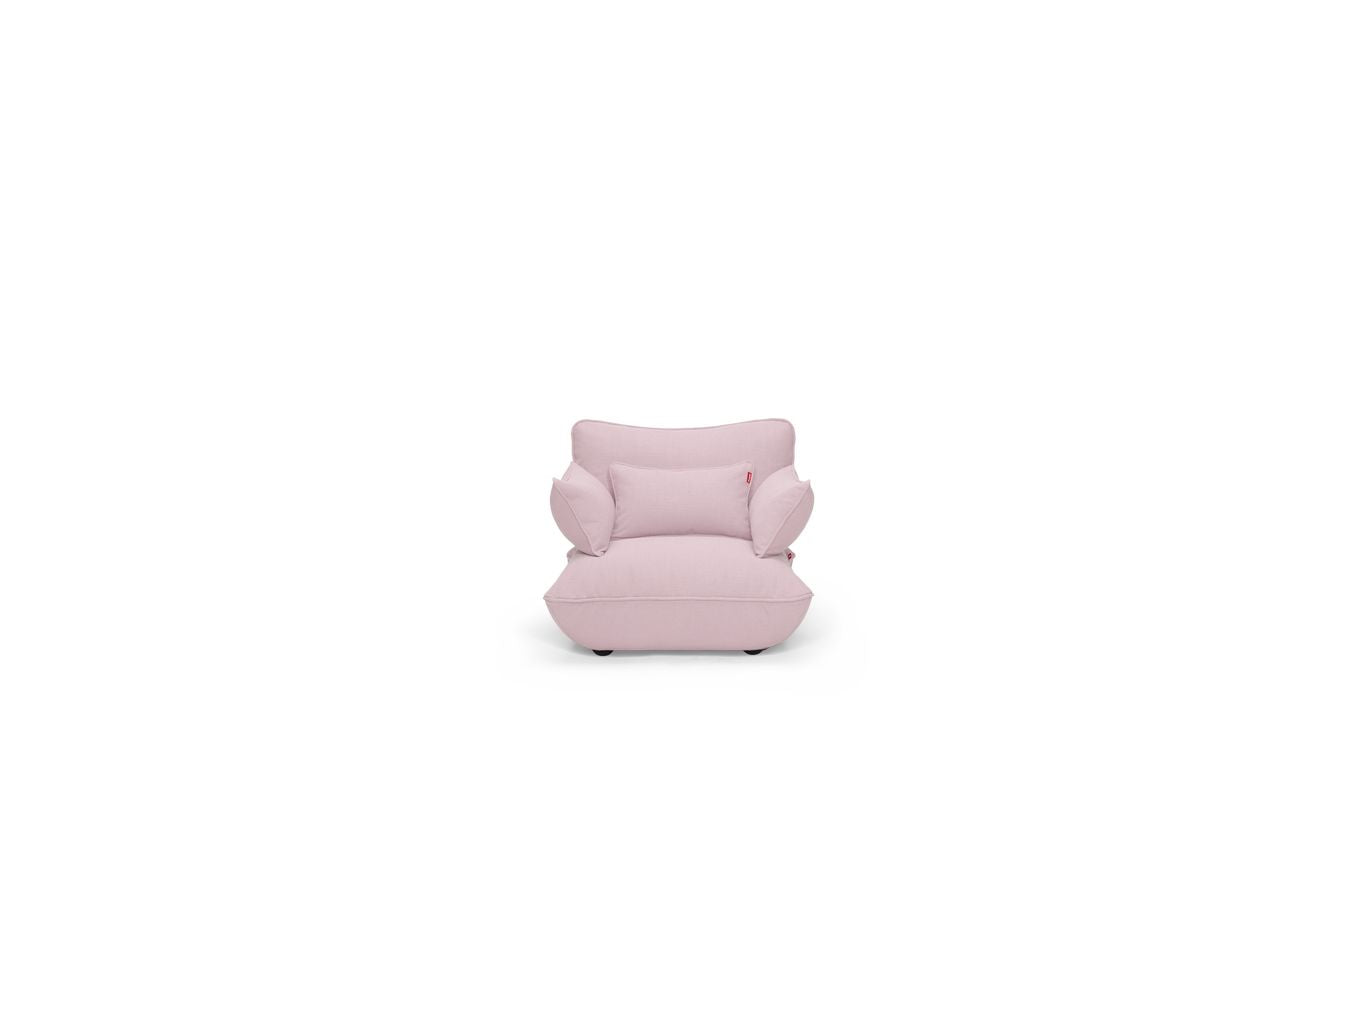 Fatboy Sumo Loveseat, Bubble Pink